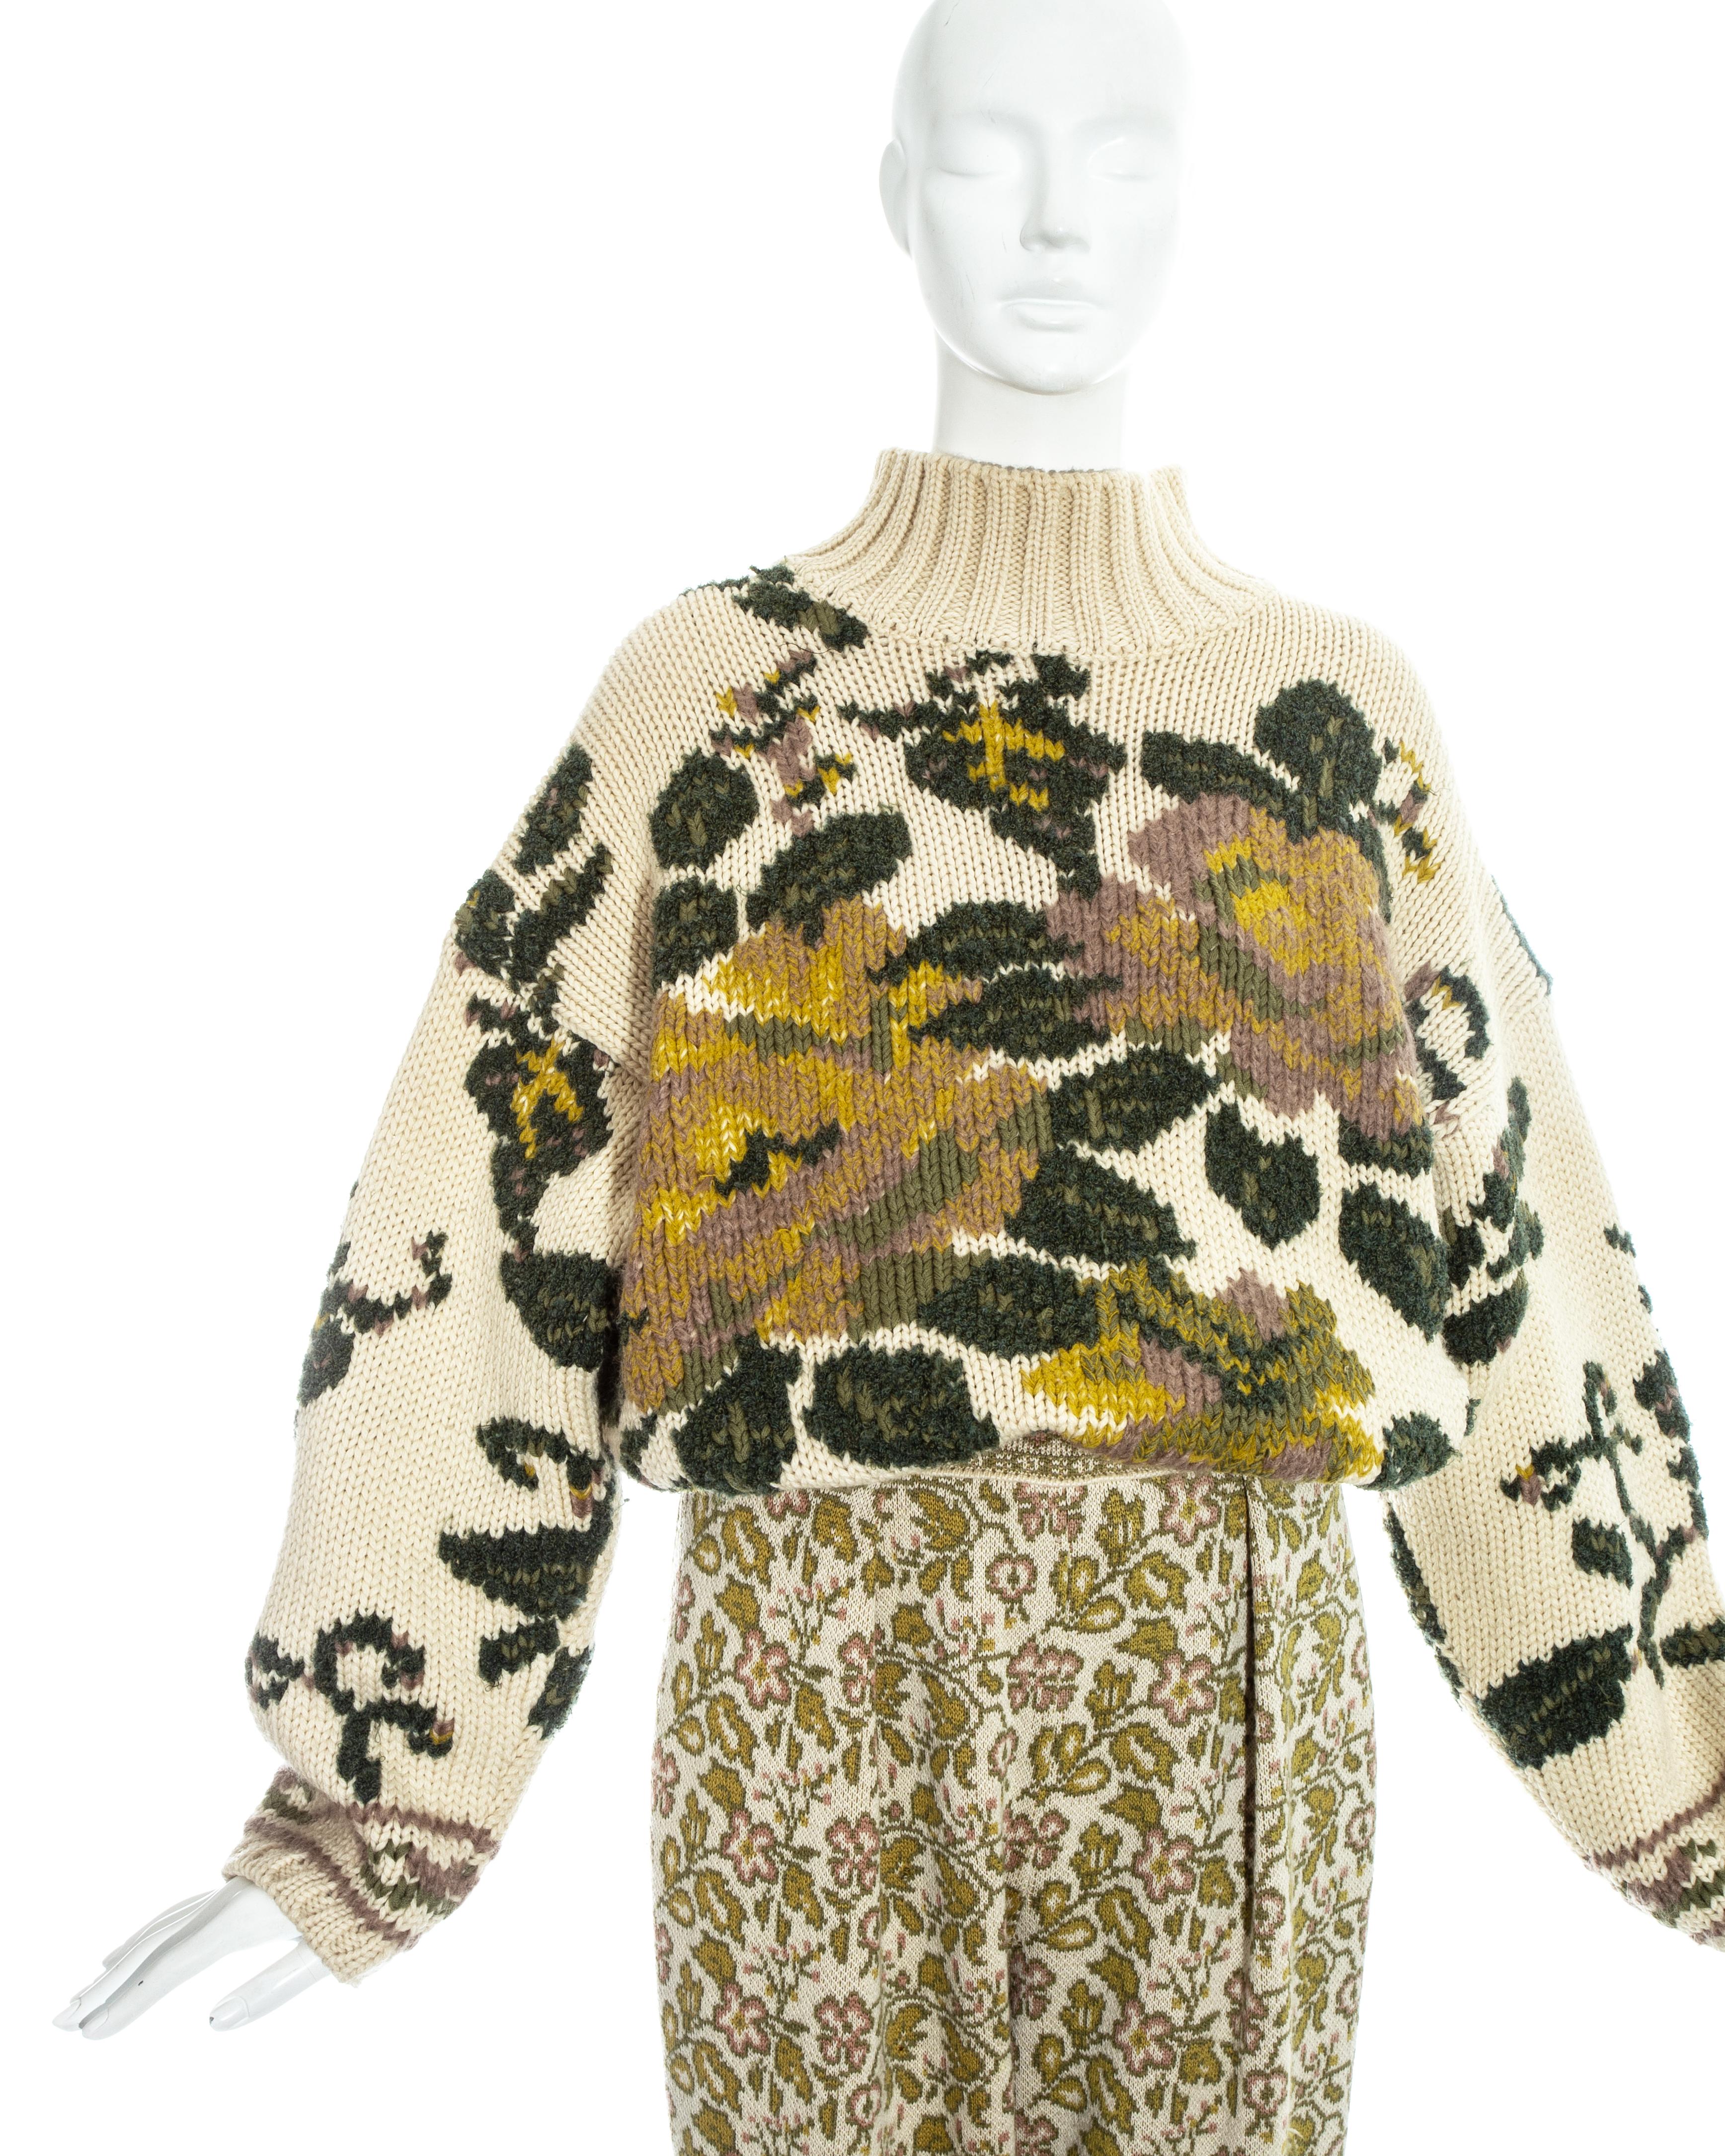 Brown Jean Paul Gaultier knitted wool floral sweater and stirrup pants set, fw 1984 For Sale